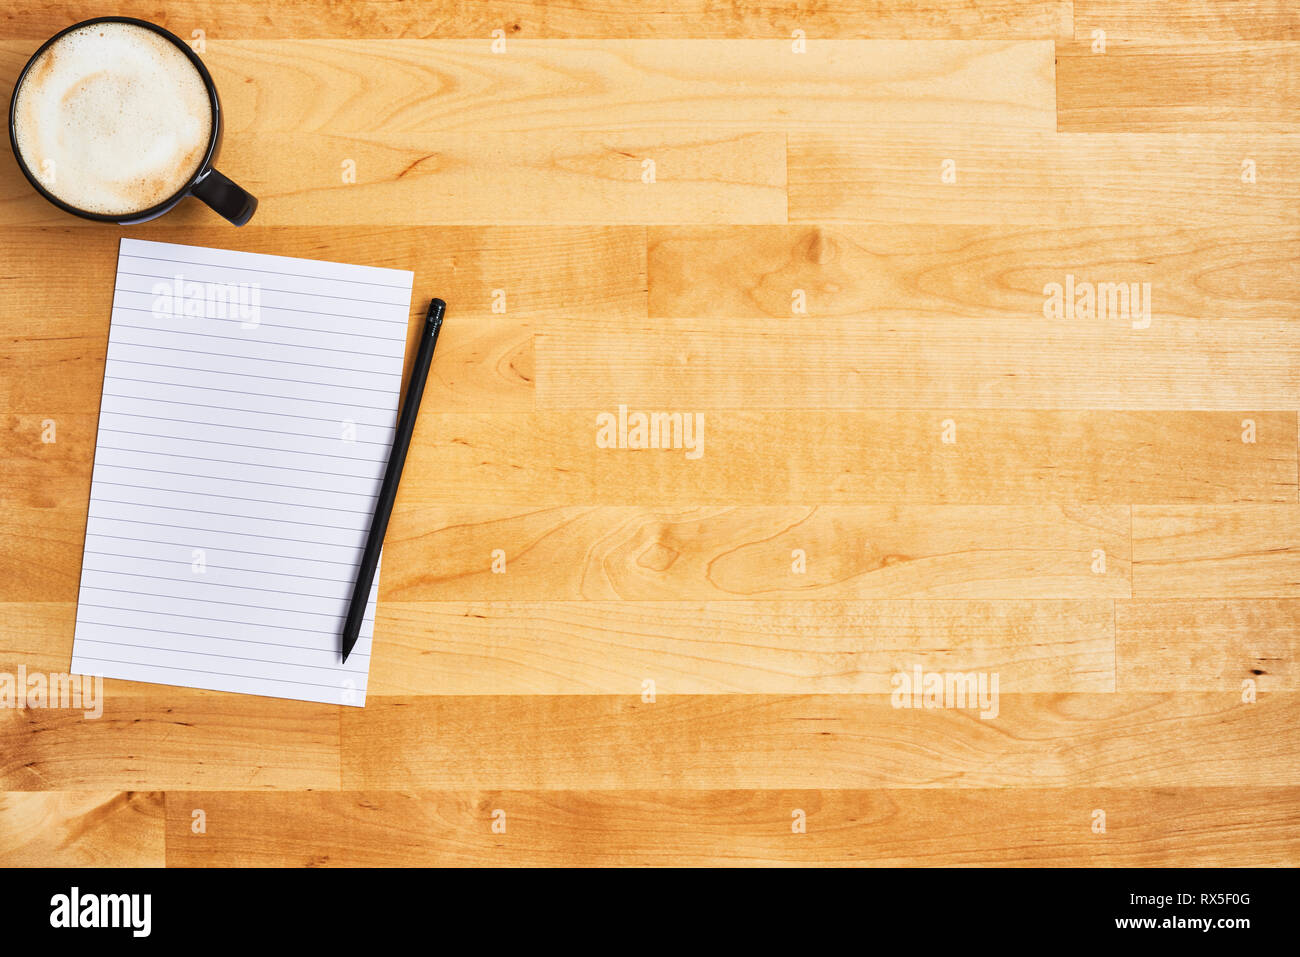 Cup of coffee or cappuccino with an empty sheet of paper and pencil on yellow wooden table. Top view. Copy space for text. Stock Photo